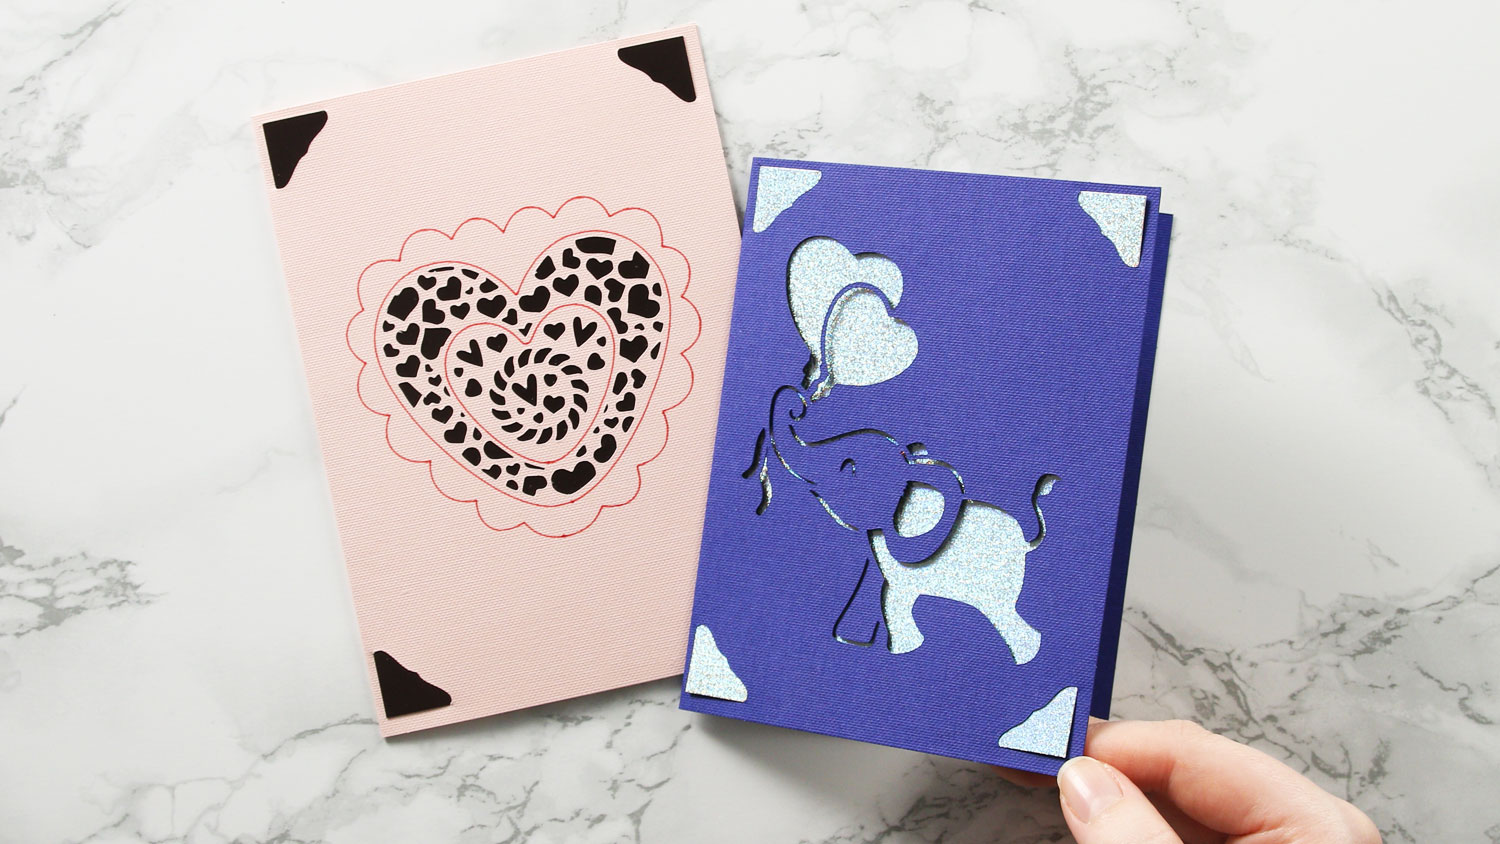 How to Make Greetings Cards in Cricut Design Space